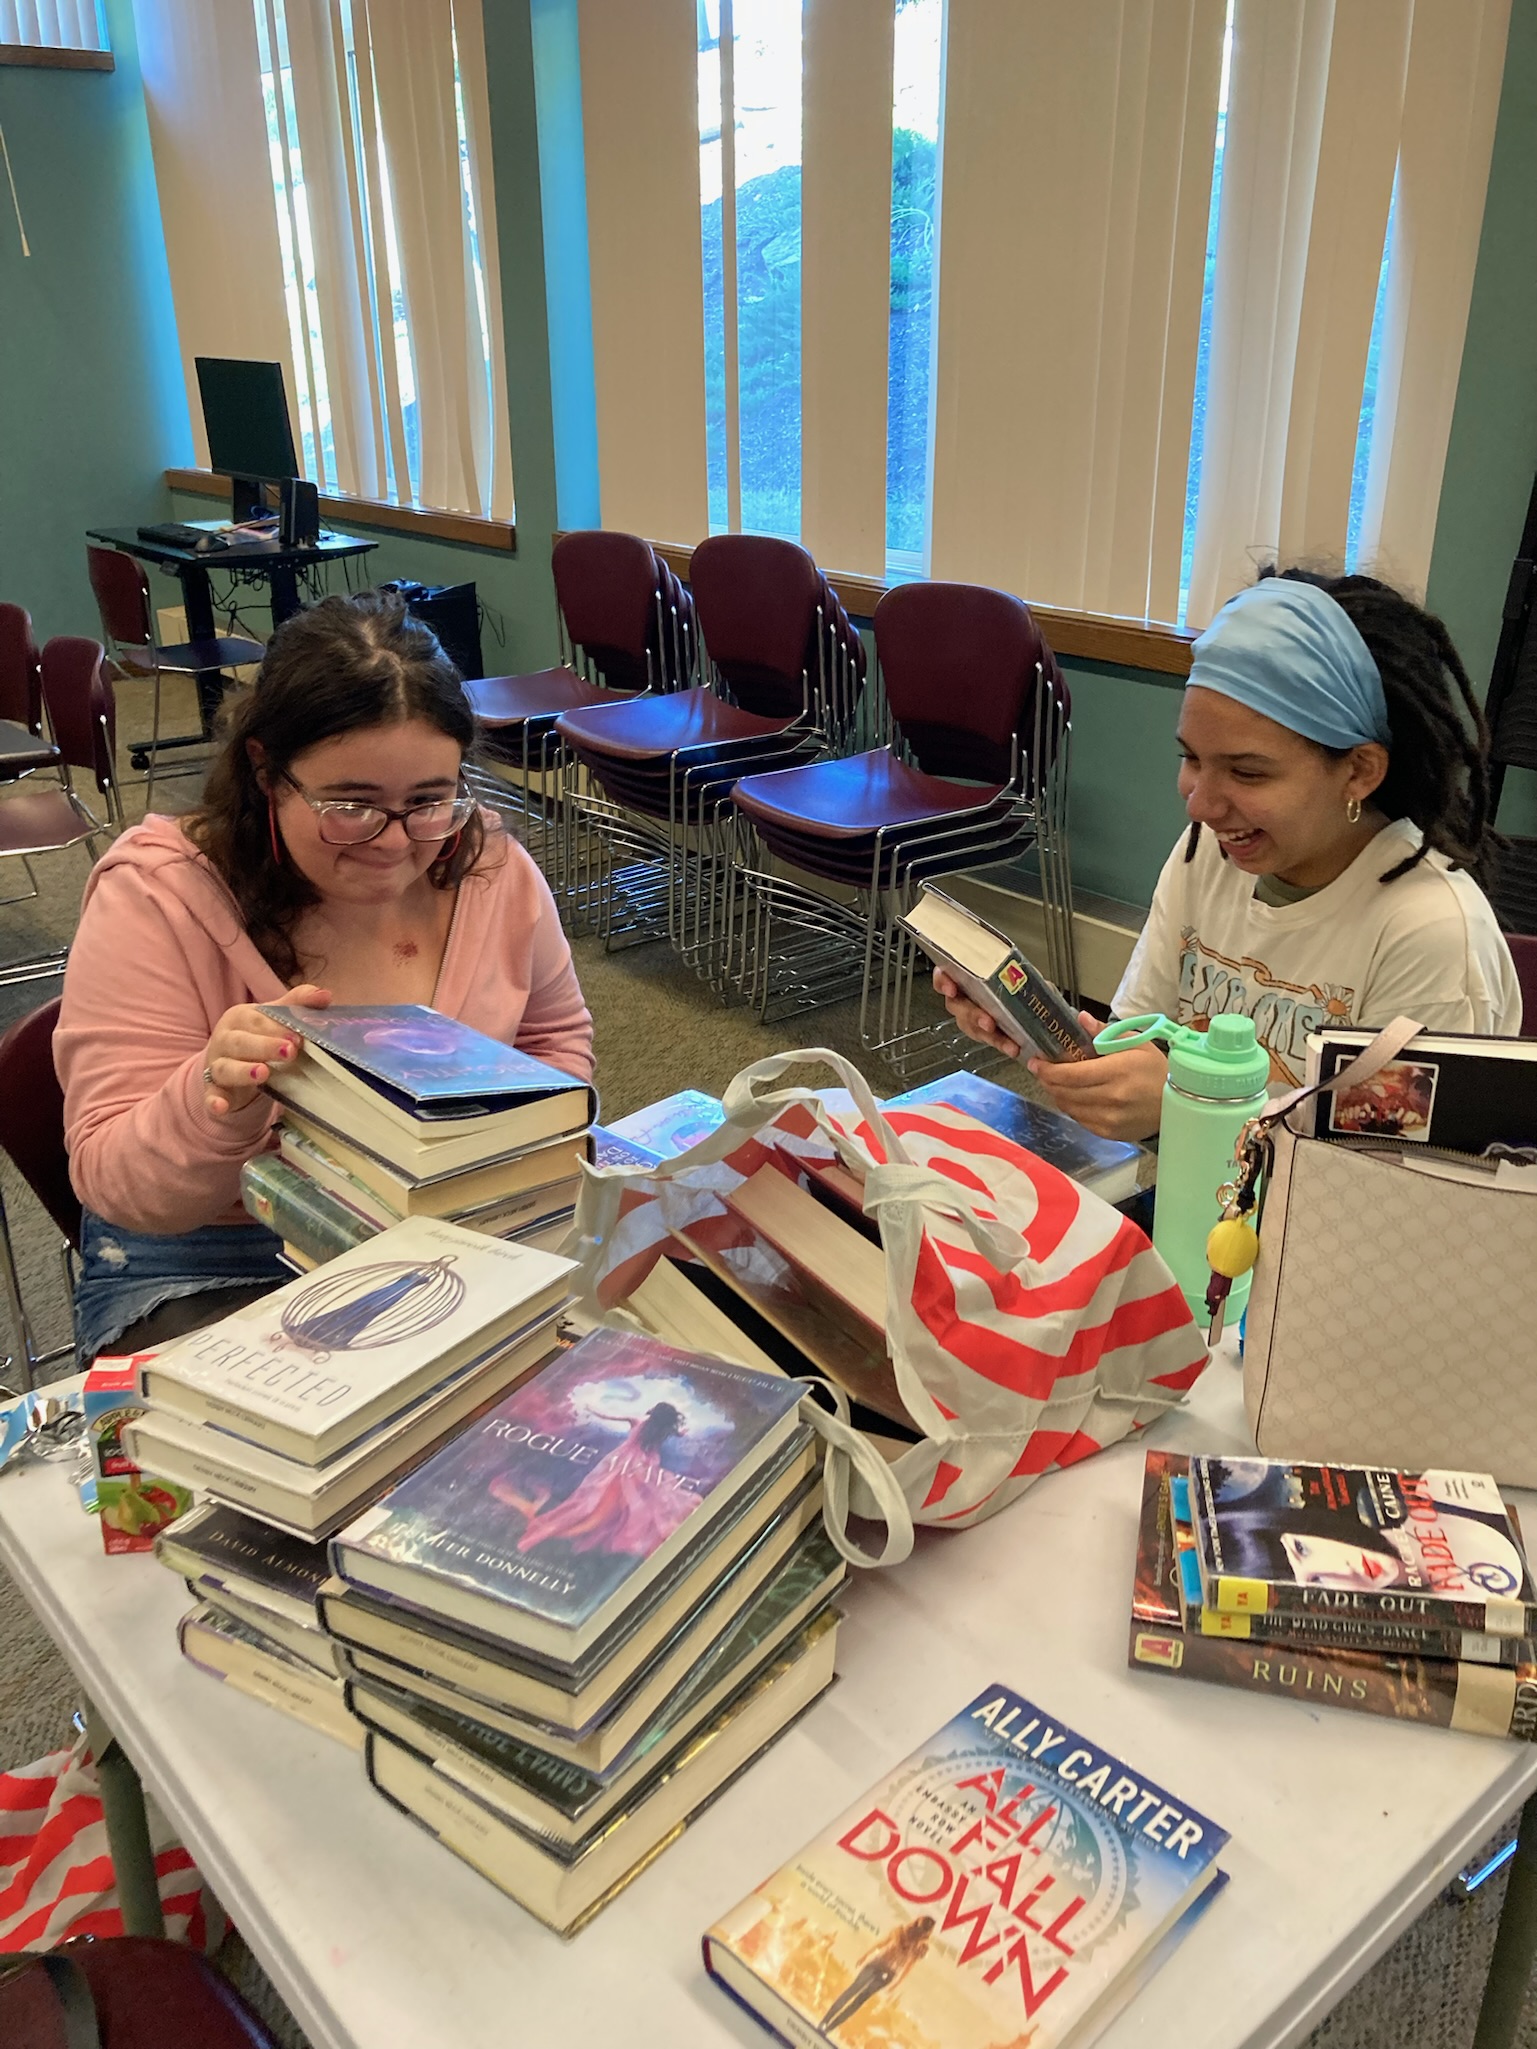 Two teenagers have fun with free books.